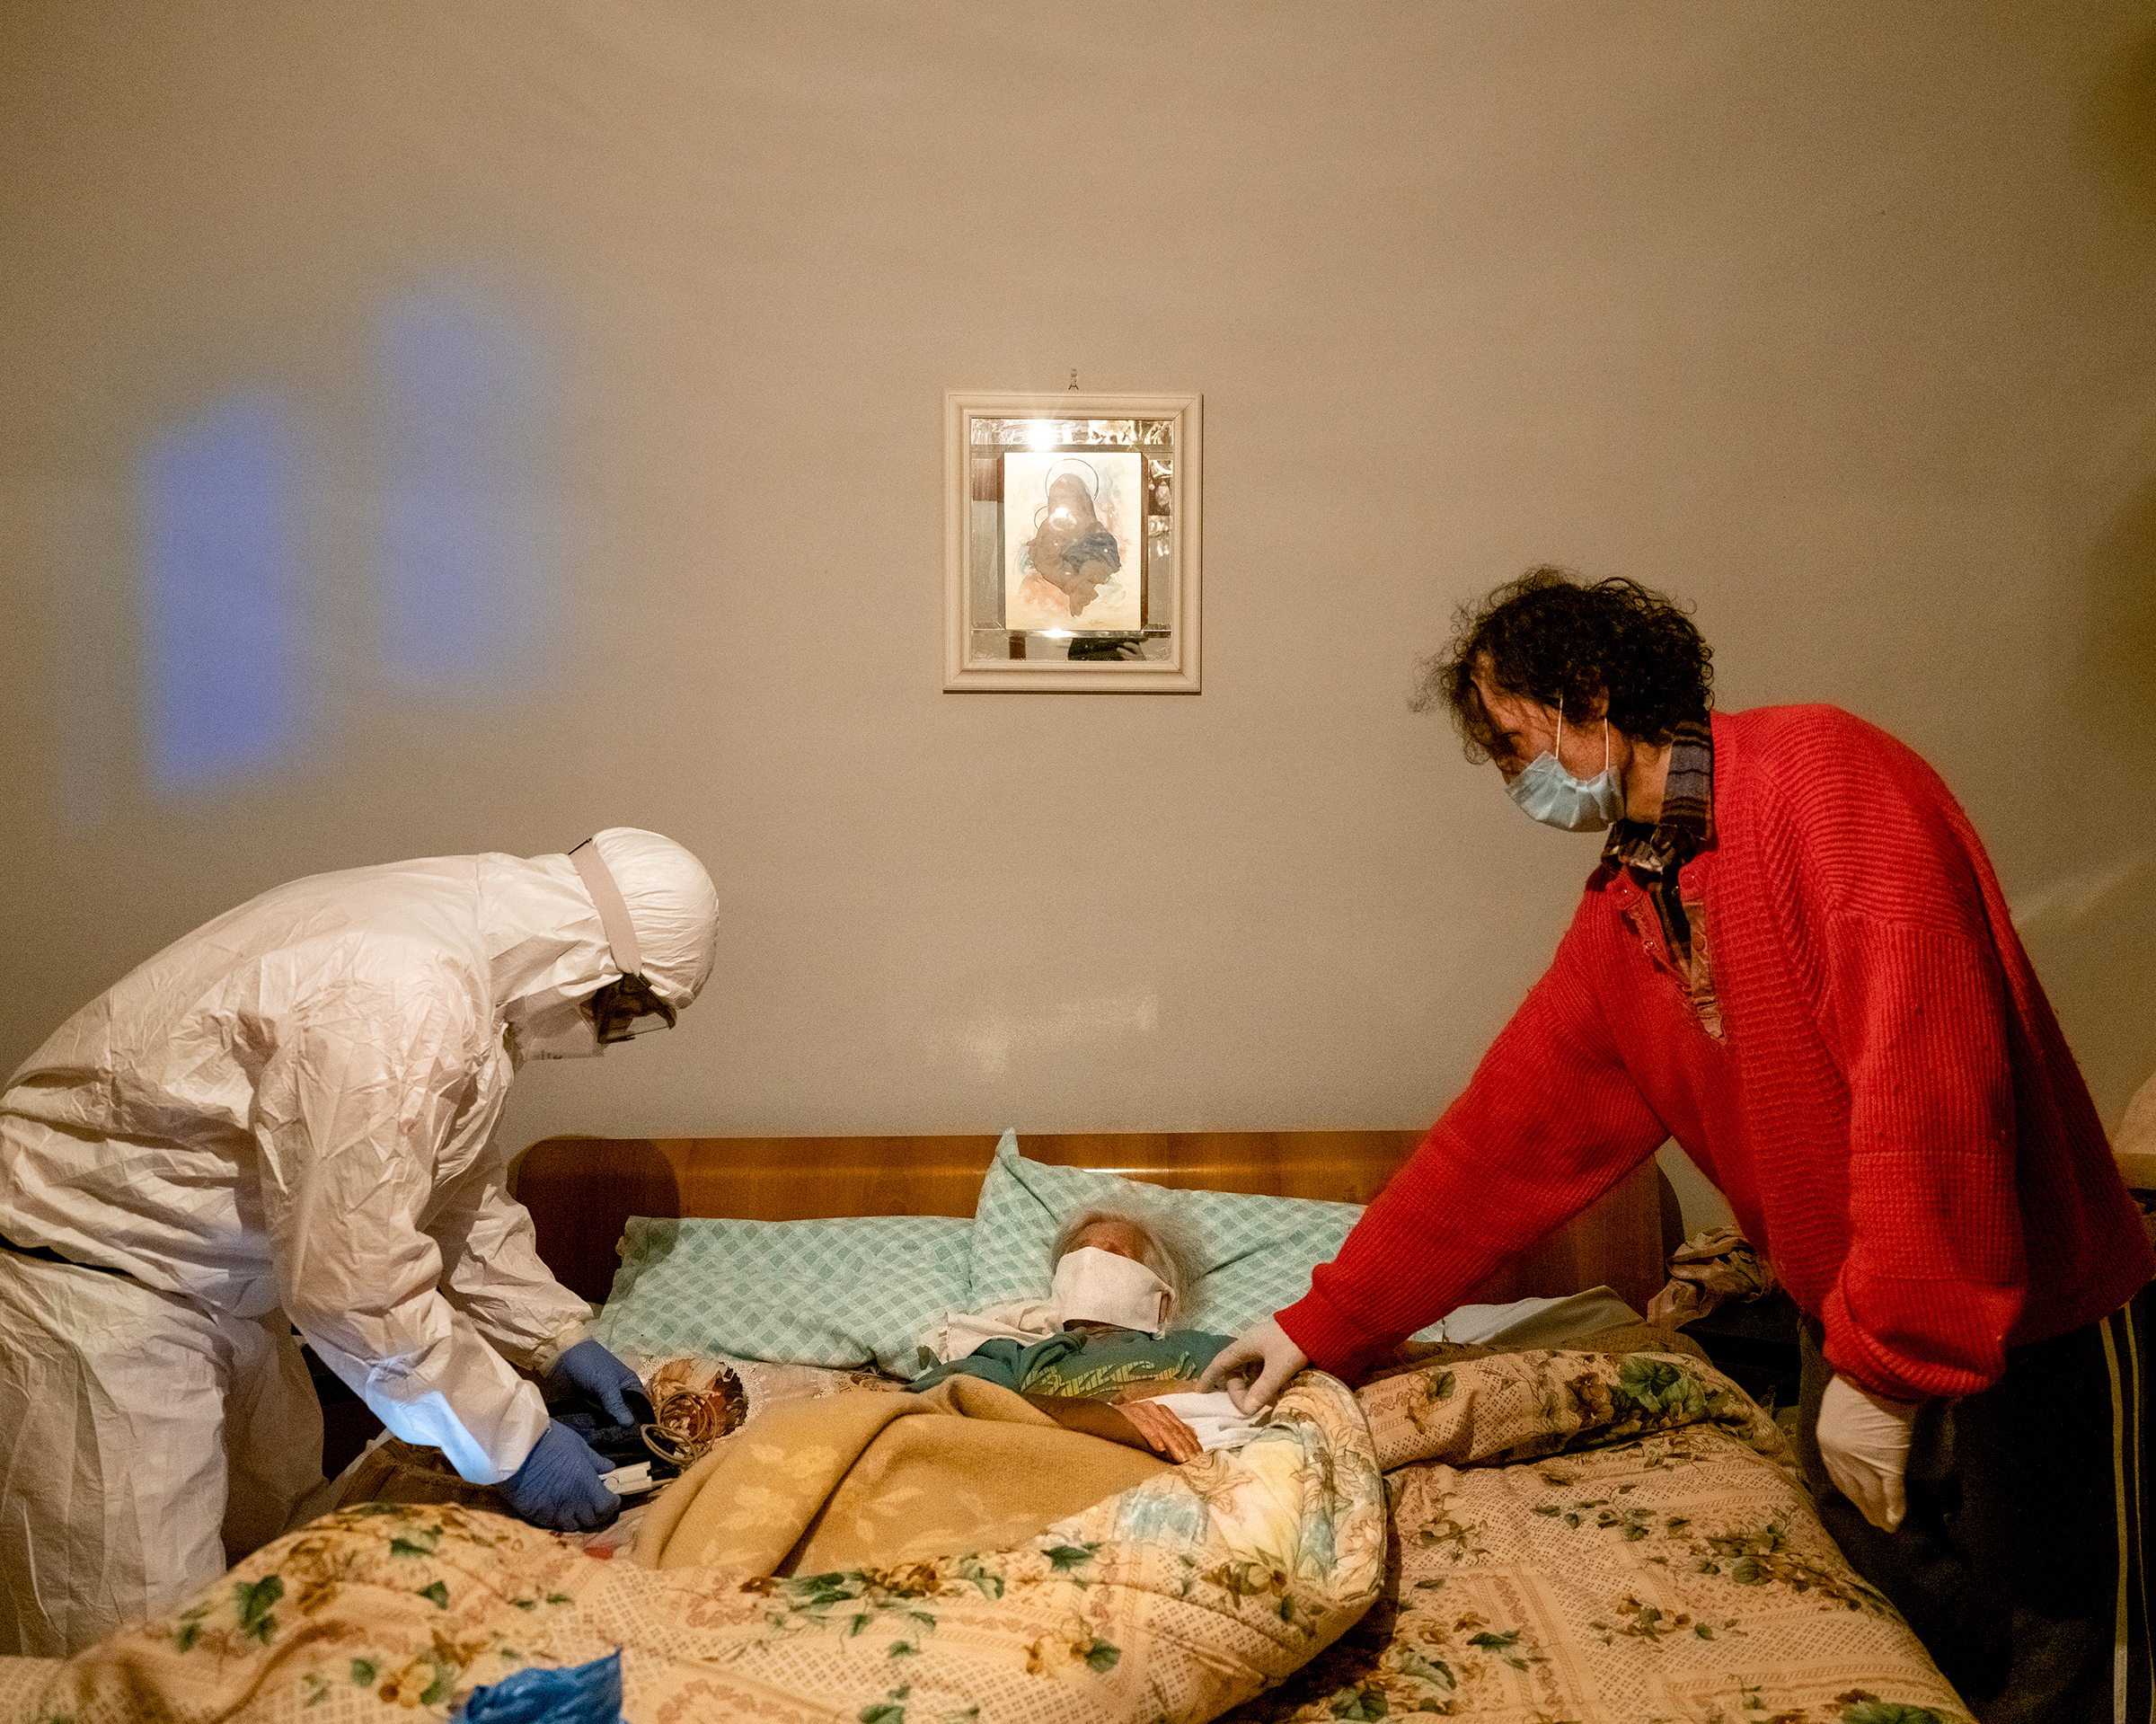 A health worker checks an elderly womanÕs oxygen level, after receiving a call about a suspected COVID-19 case, in the northern Italian province of Bergamo.